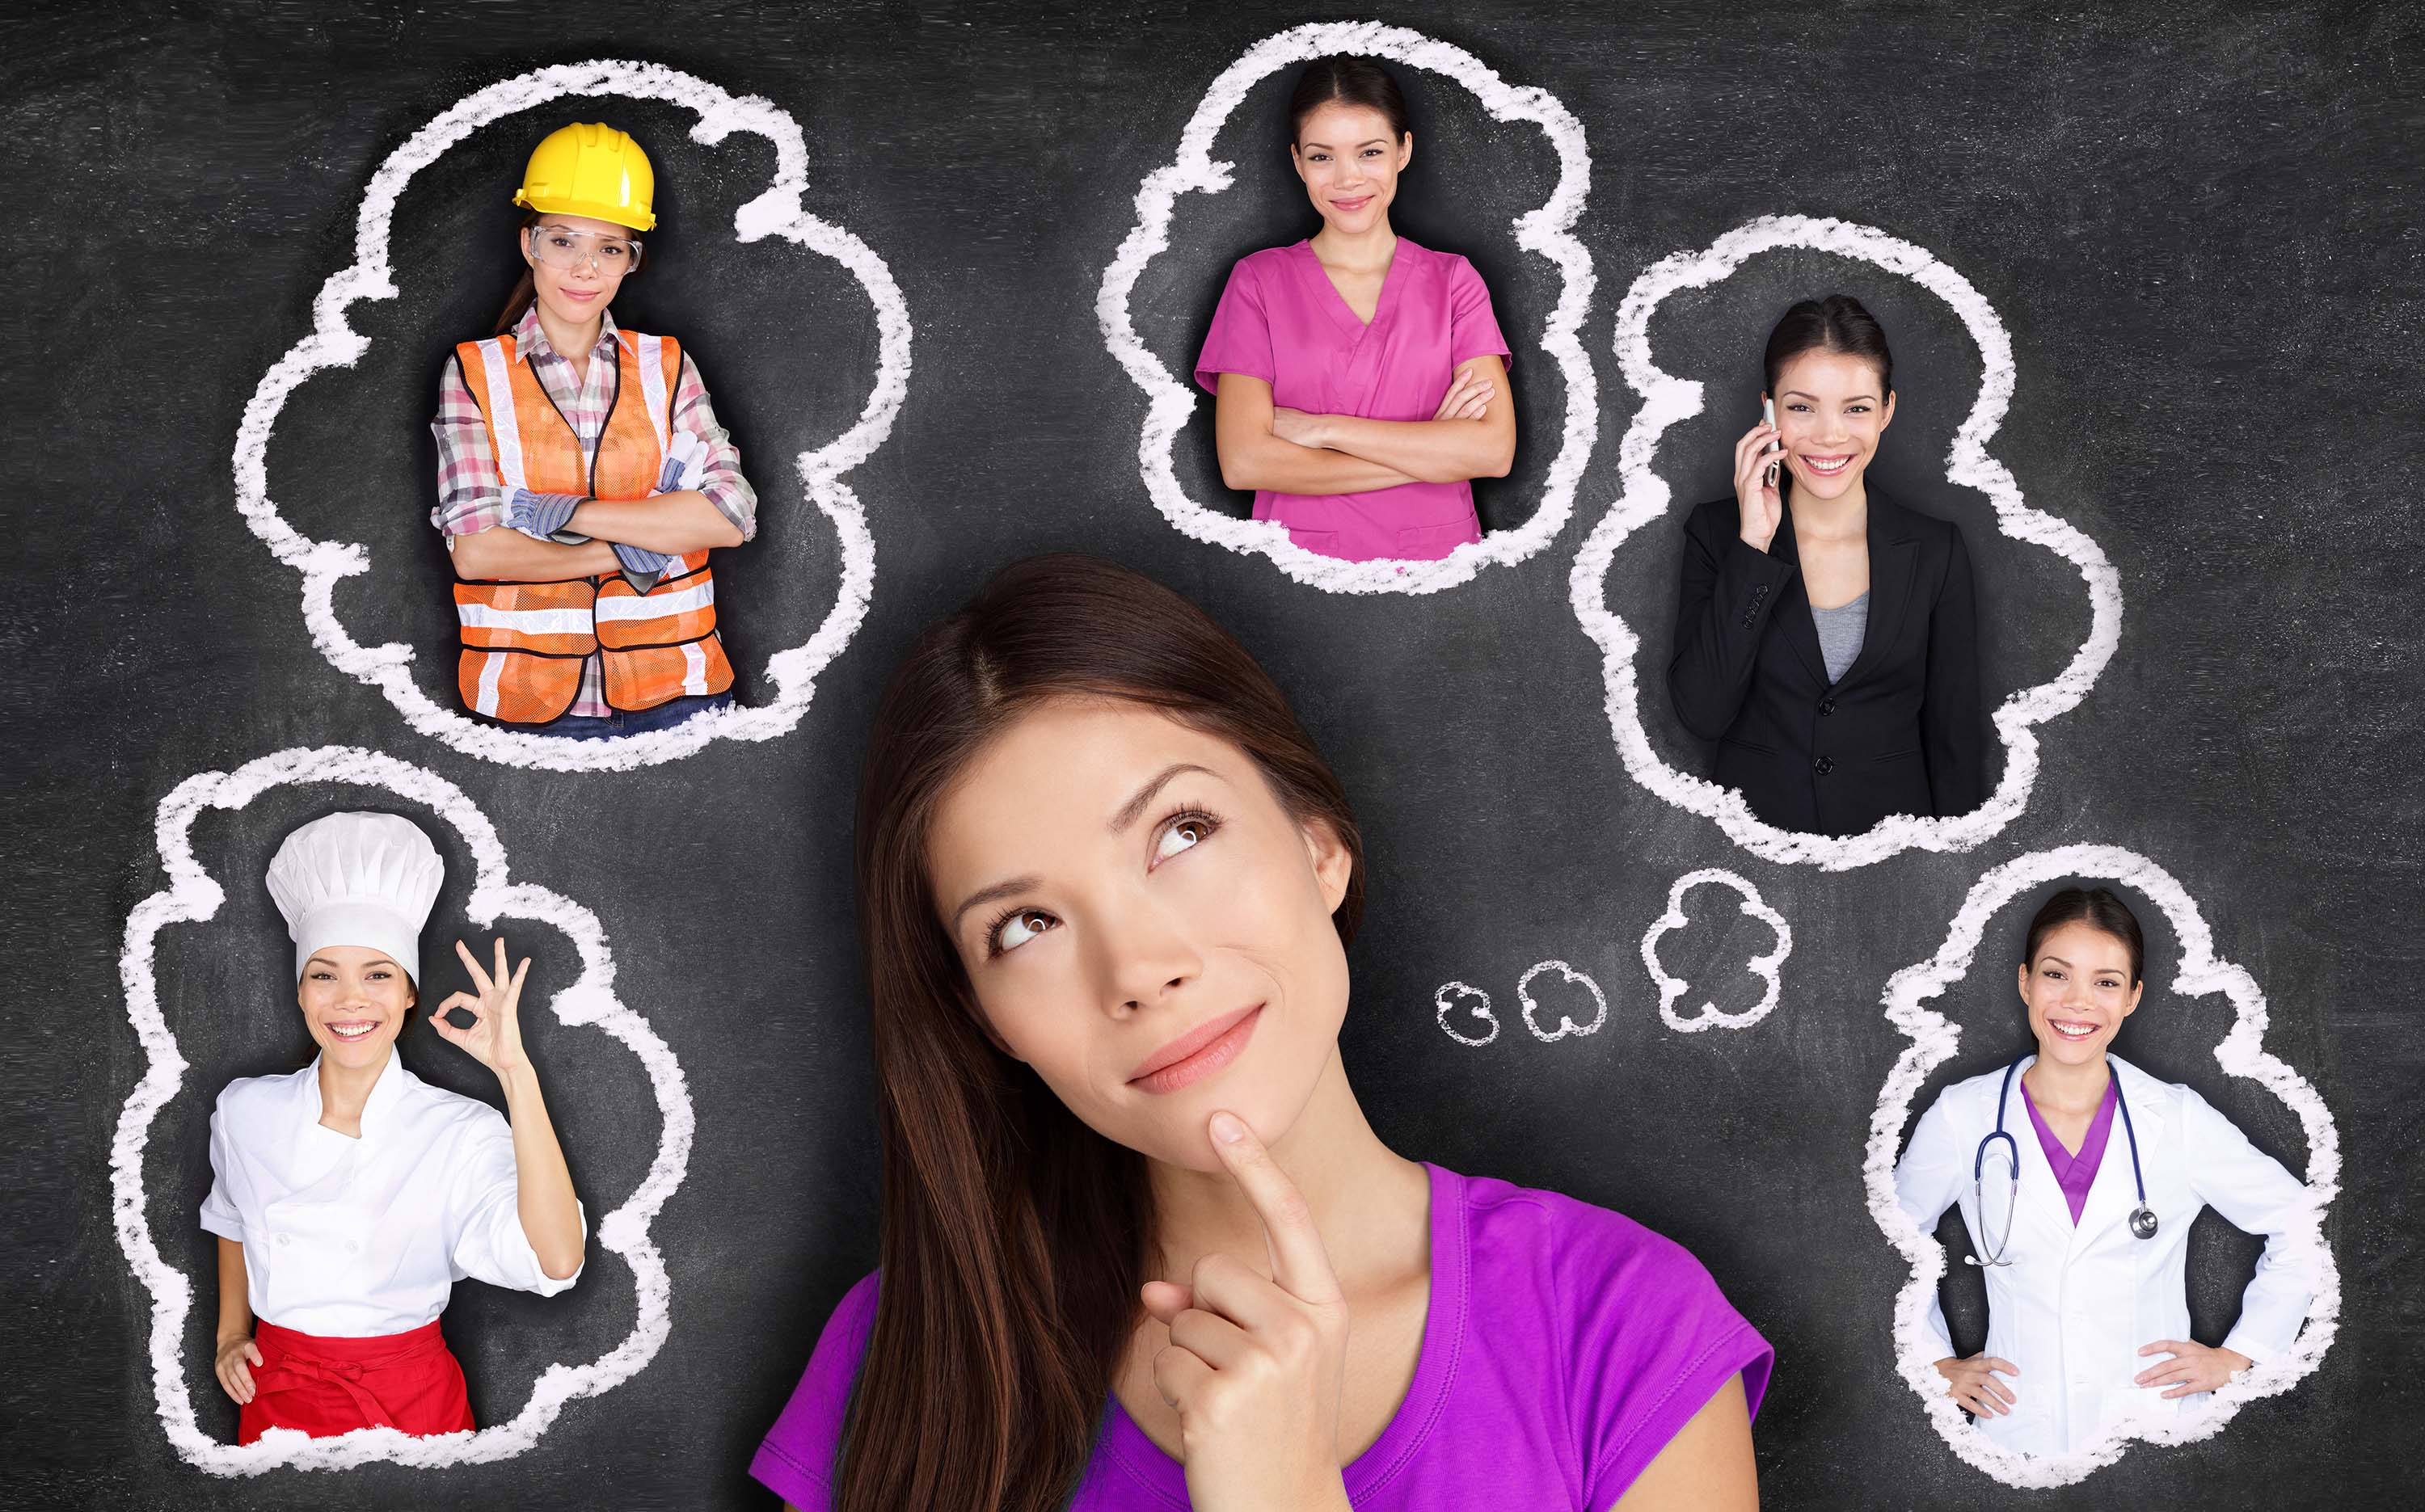 college age female with thought clouds and a different career depicted in each cloud: chef, construction worker, nurse, business person, doctor